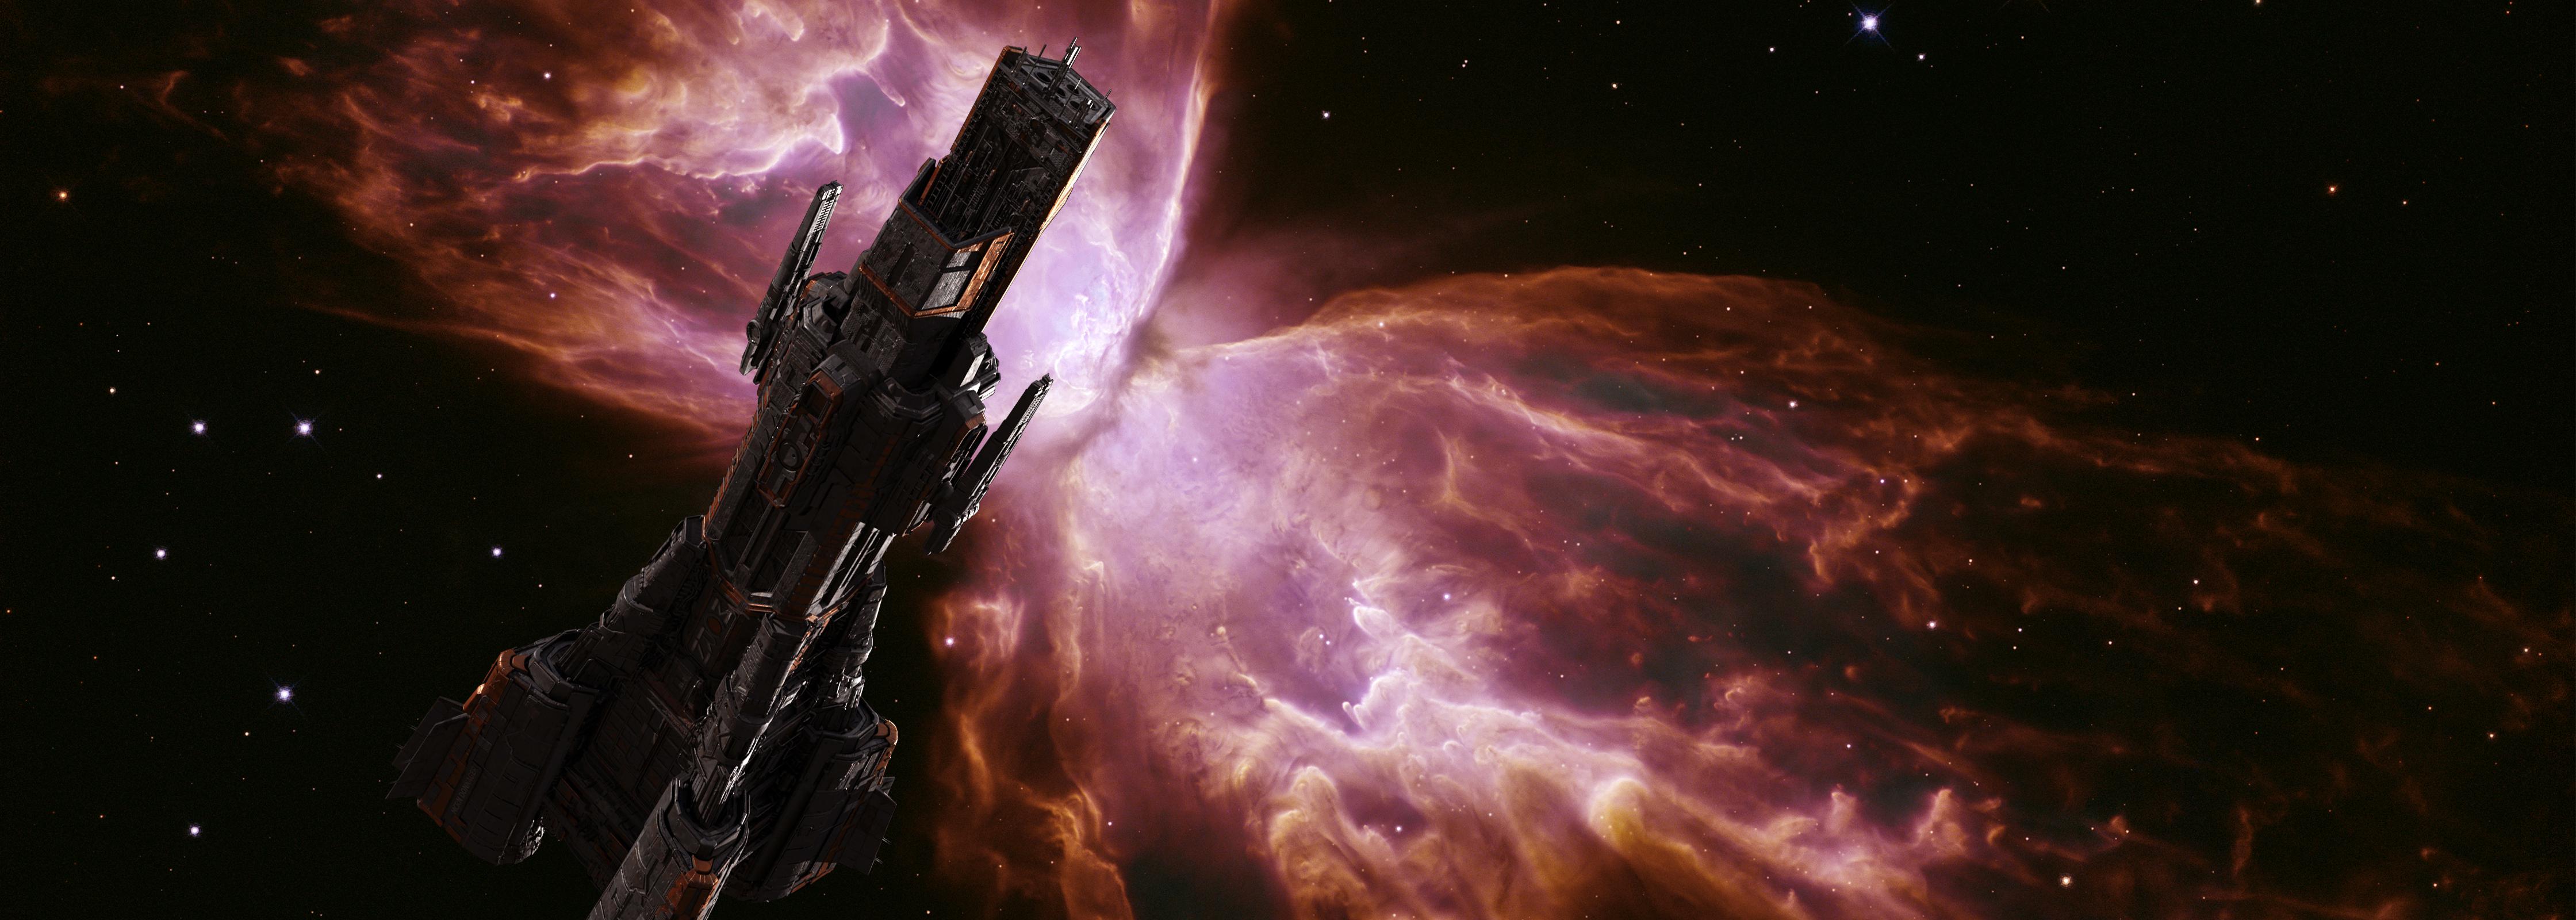 General 4480x1600 The Expanse space science fiction TV series spaceship